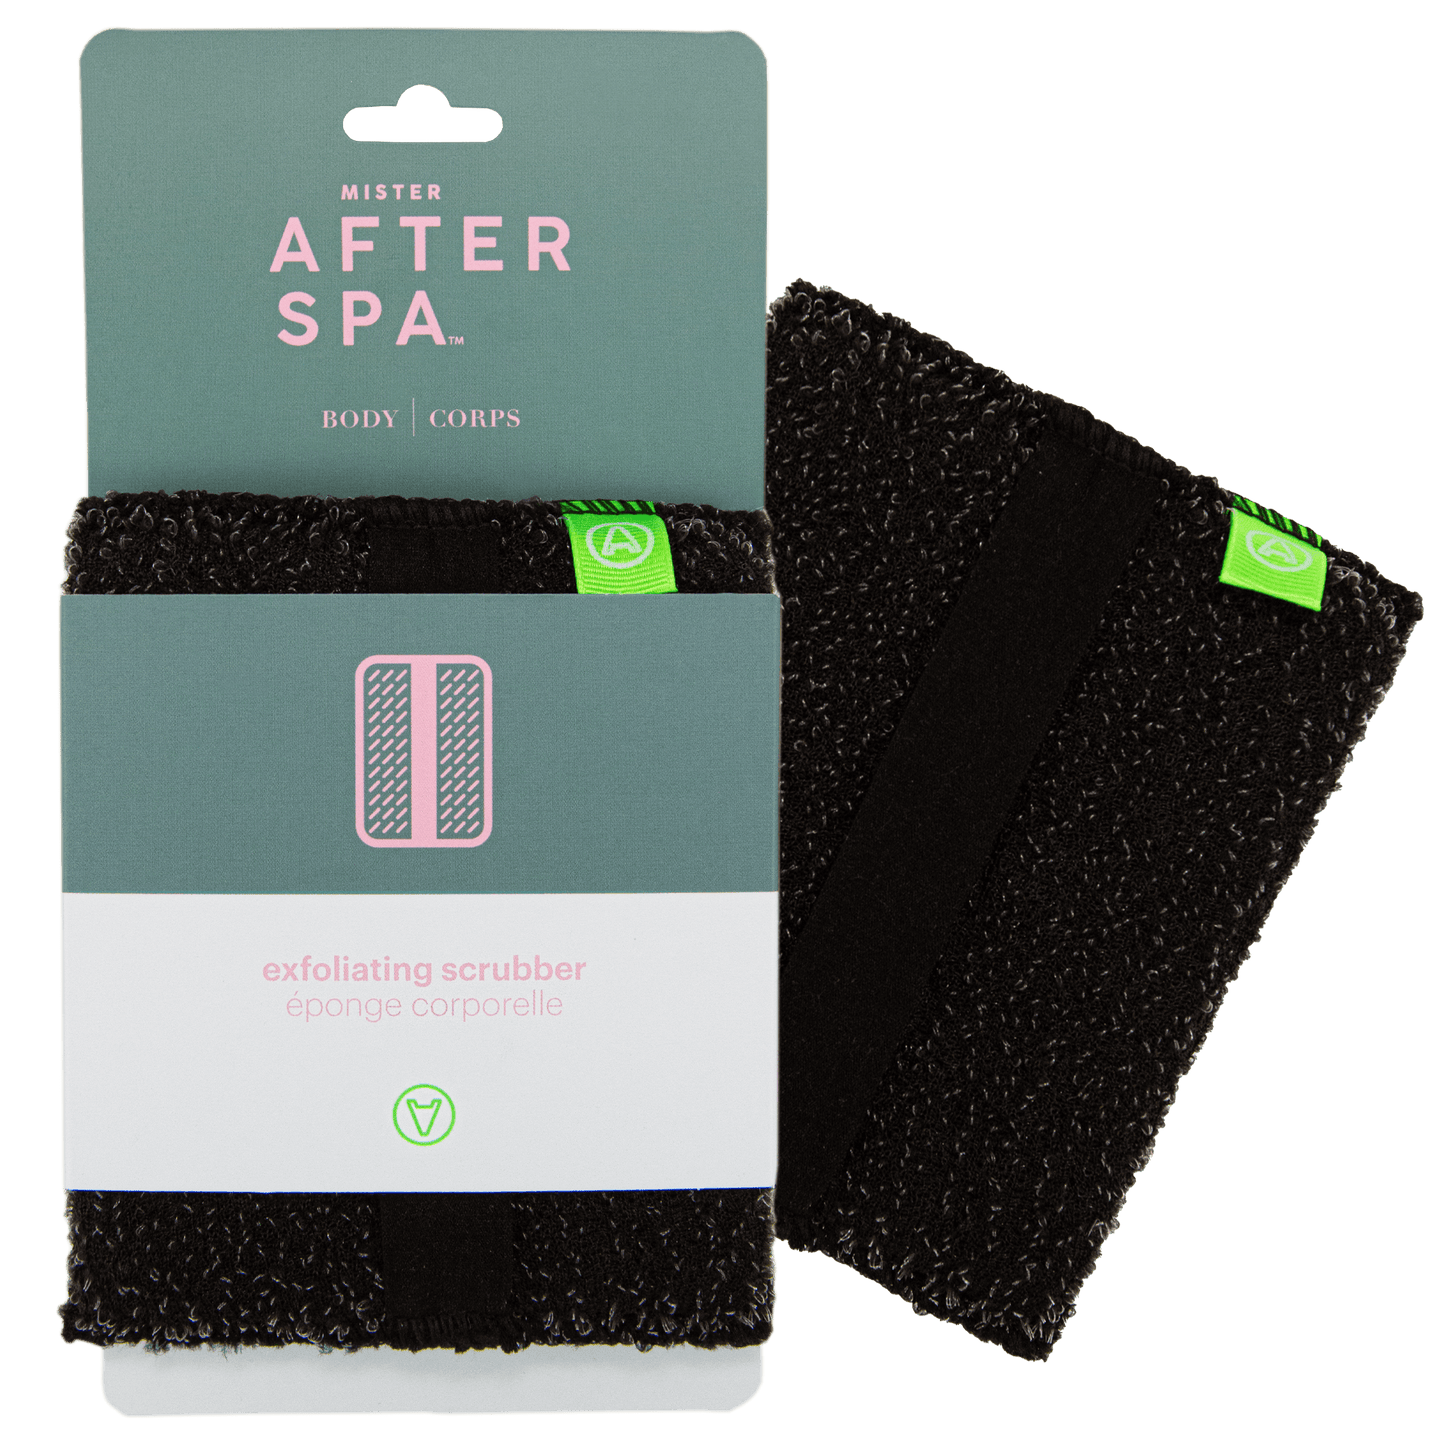 Afterspa Exfoliating Scrubber _ to cleanse and exfoliate the body